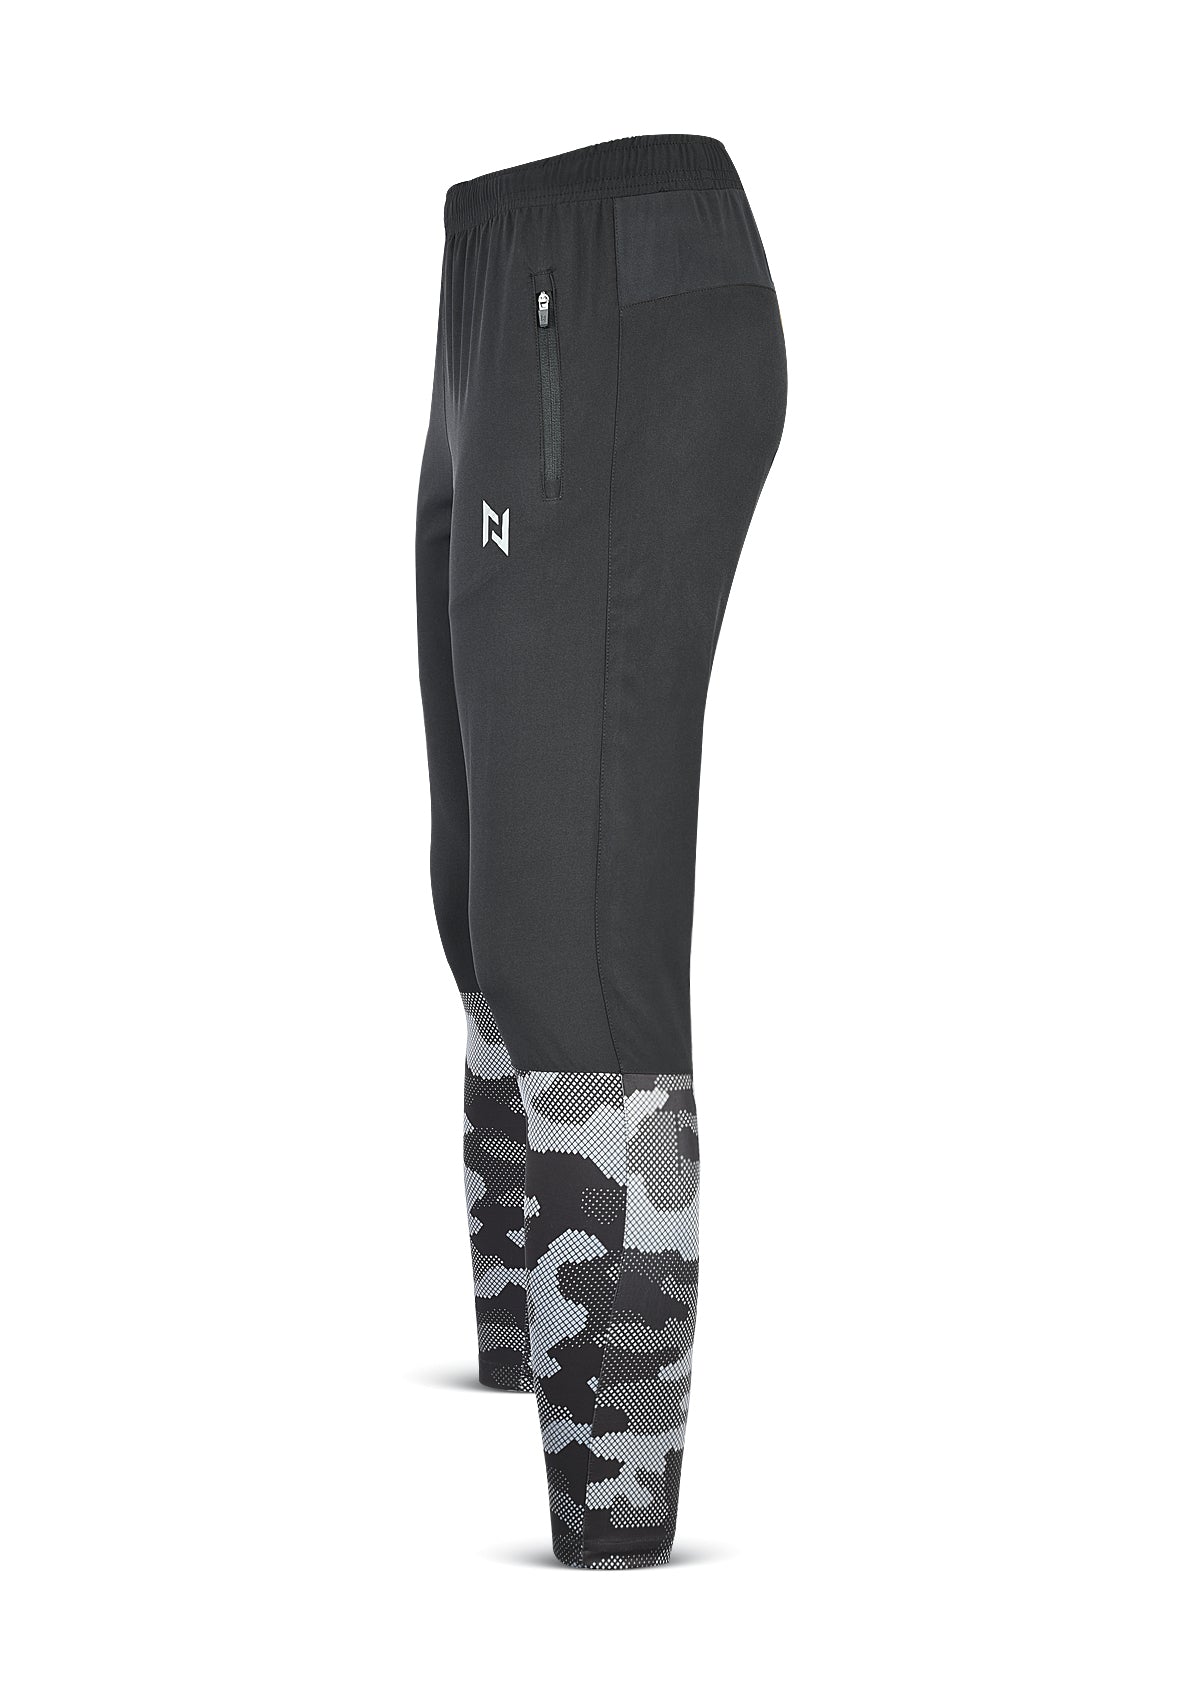 HYBRID PRO TROUSERS - Nomad Apparel